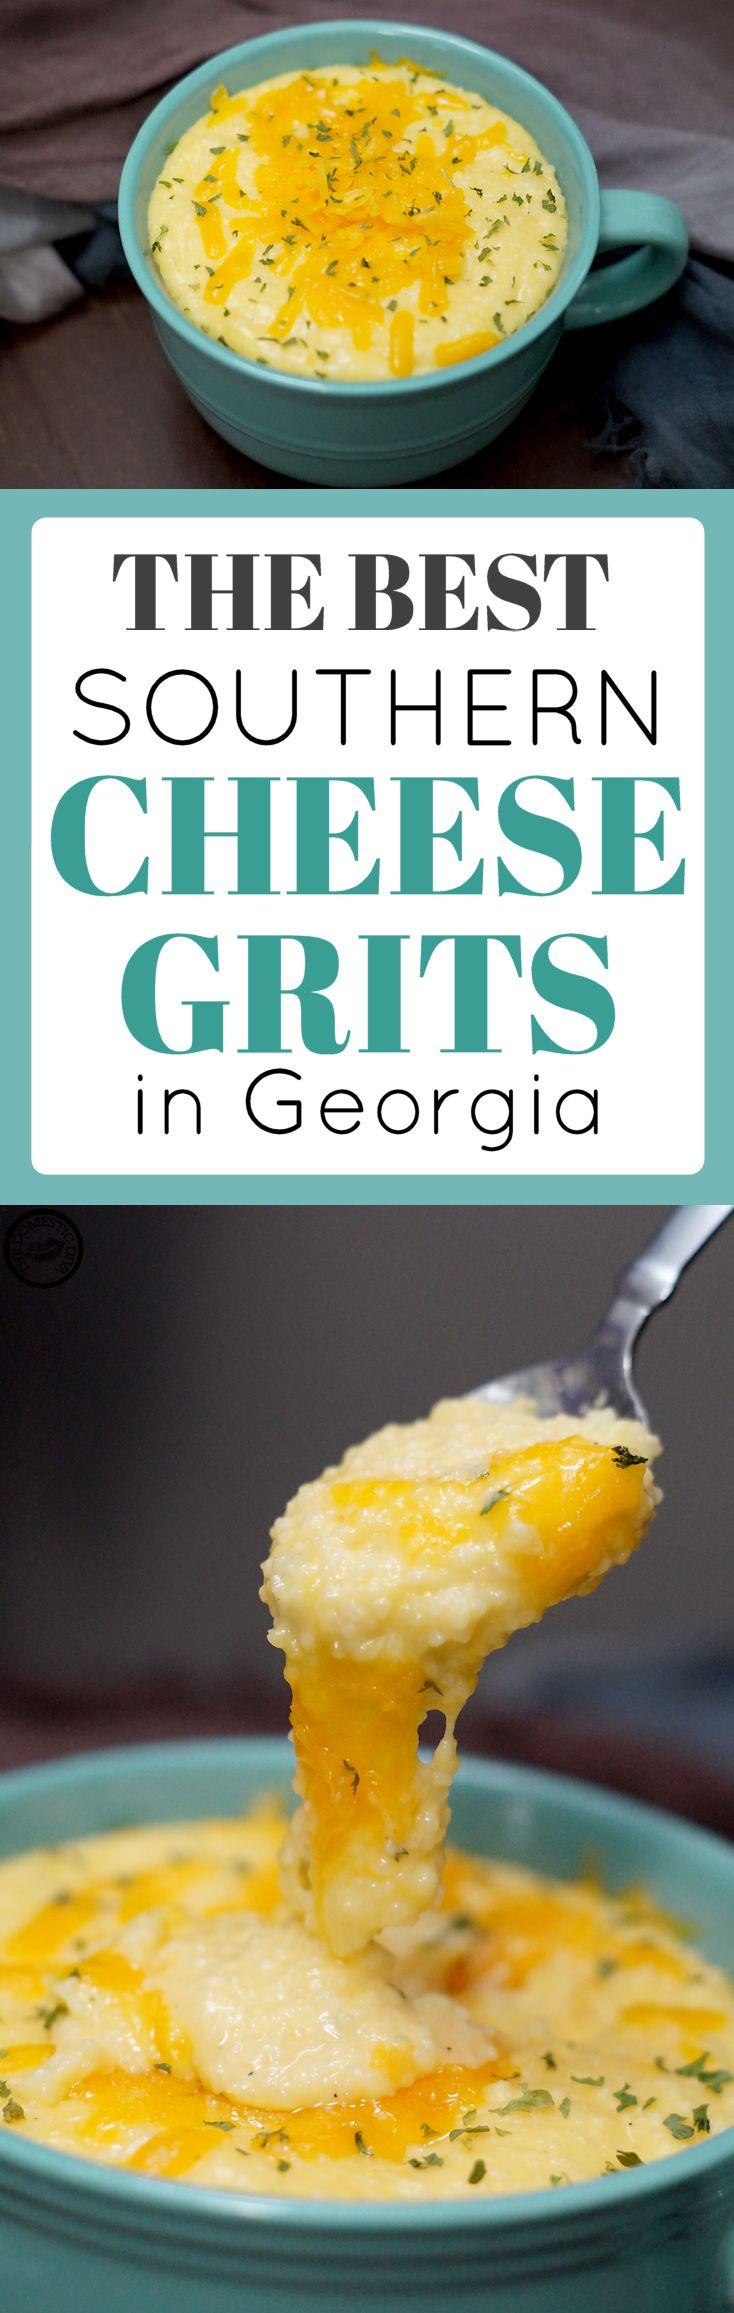 The Best Southern Cheese Grits Recipe in Georgia